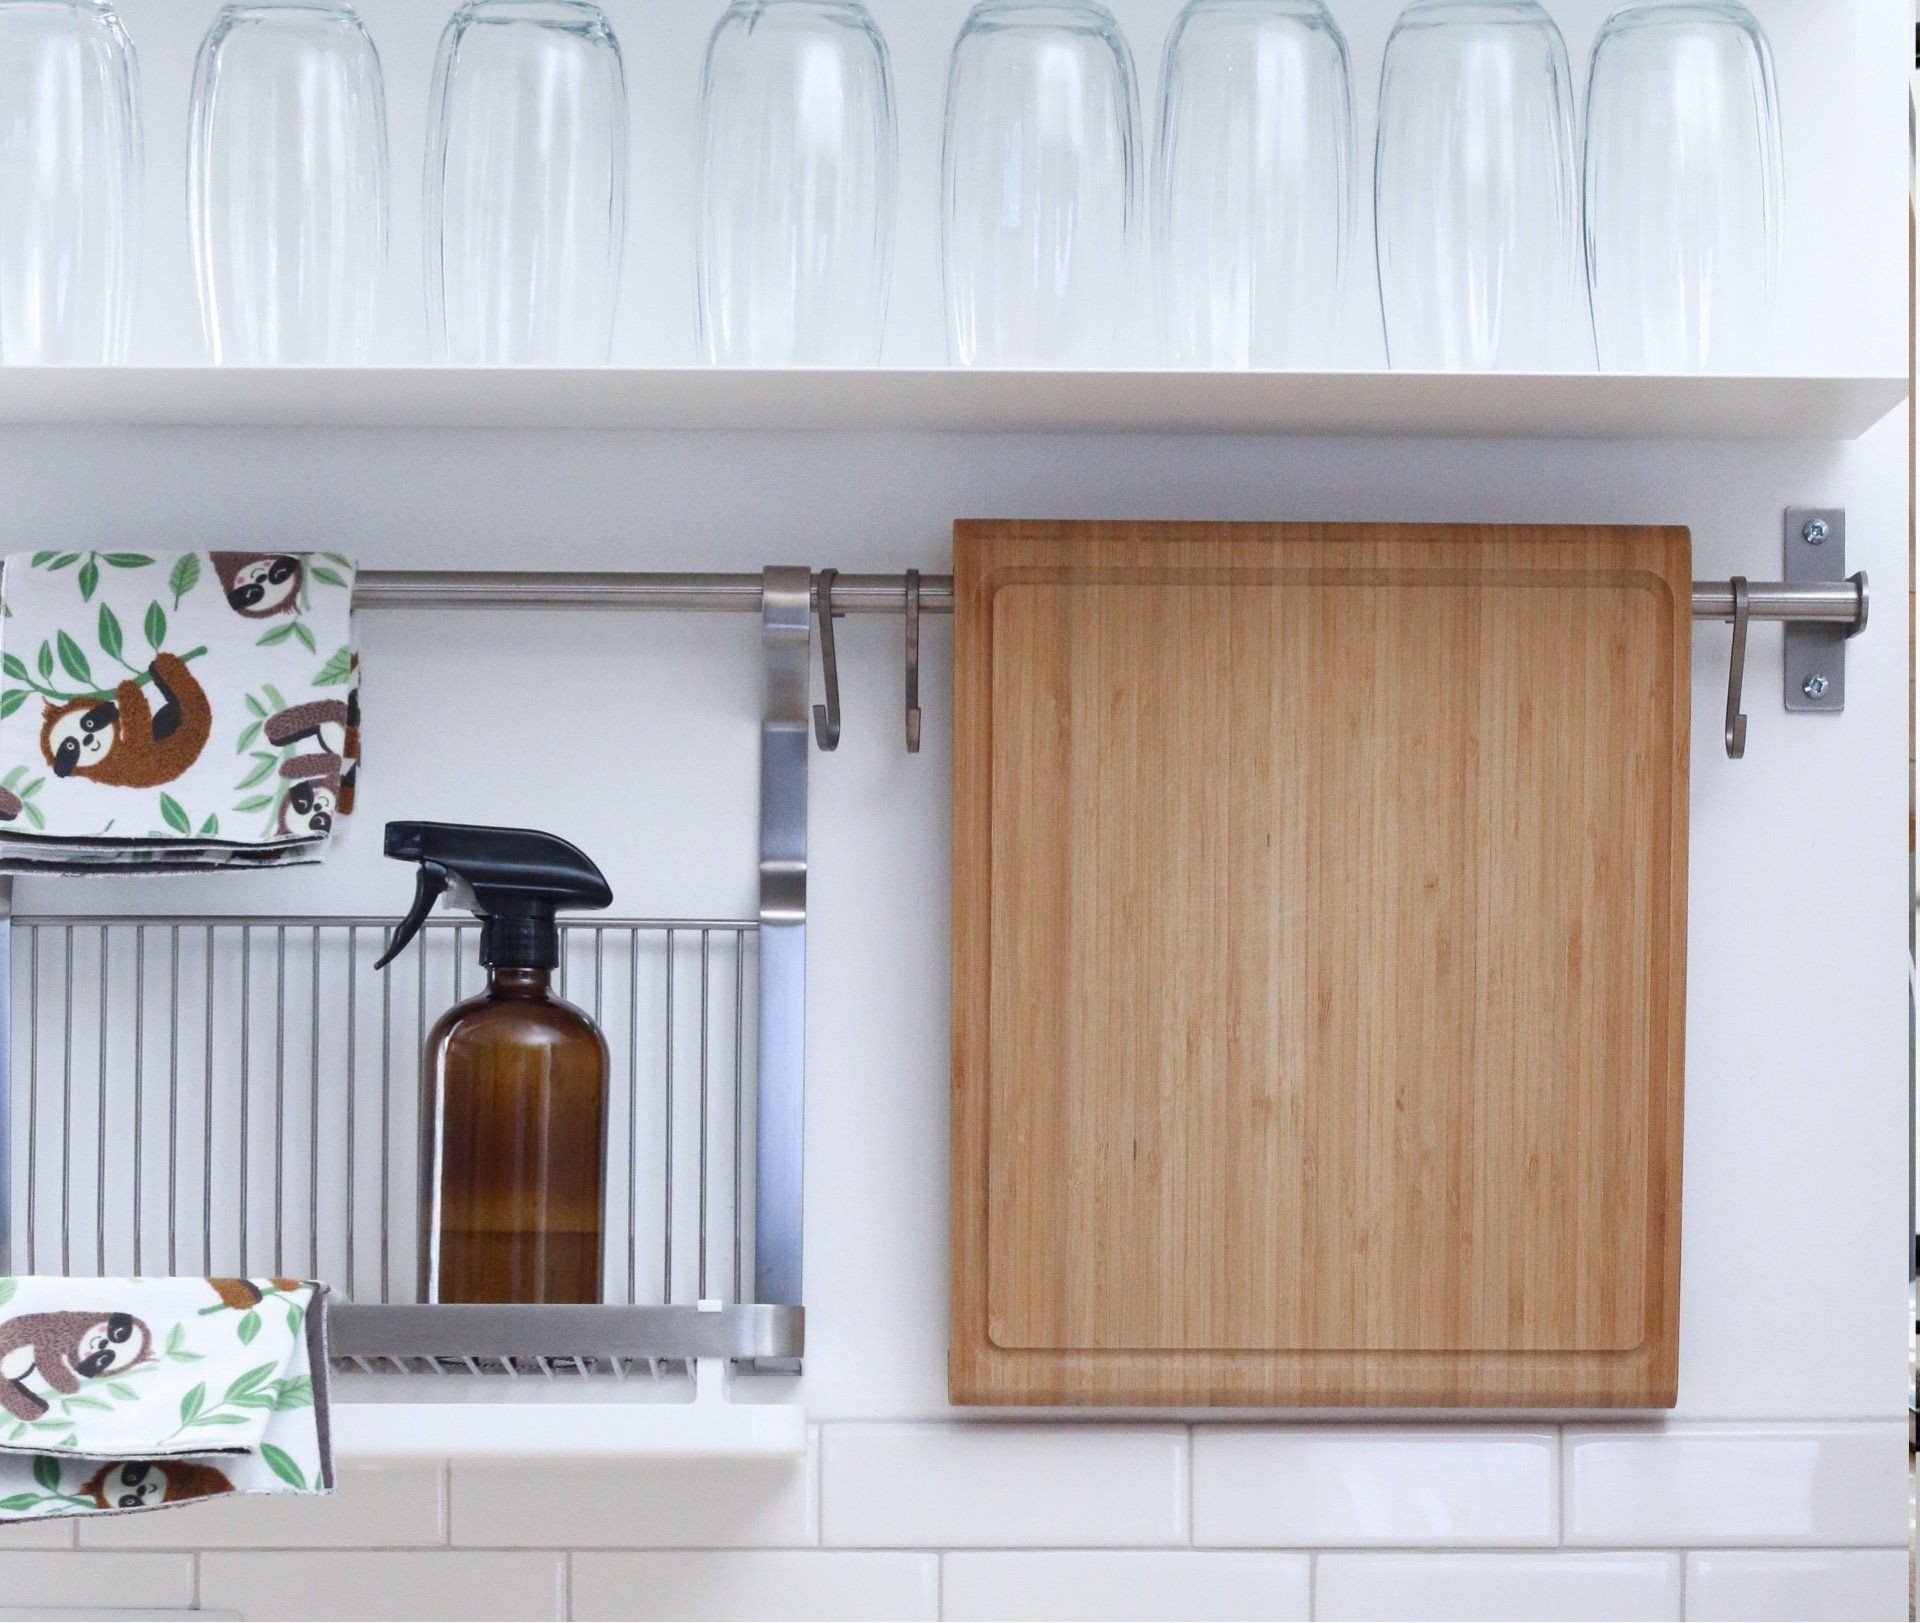 A kitchen with a cutting board and glasses on a shelf